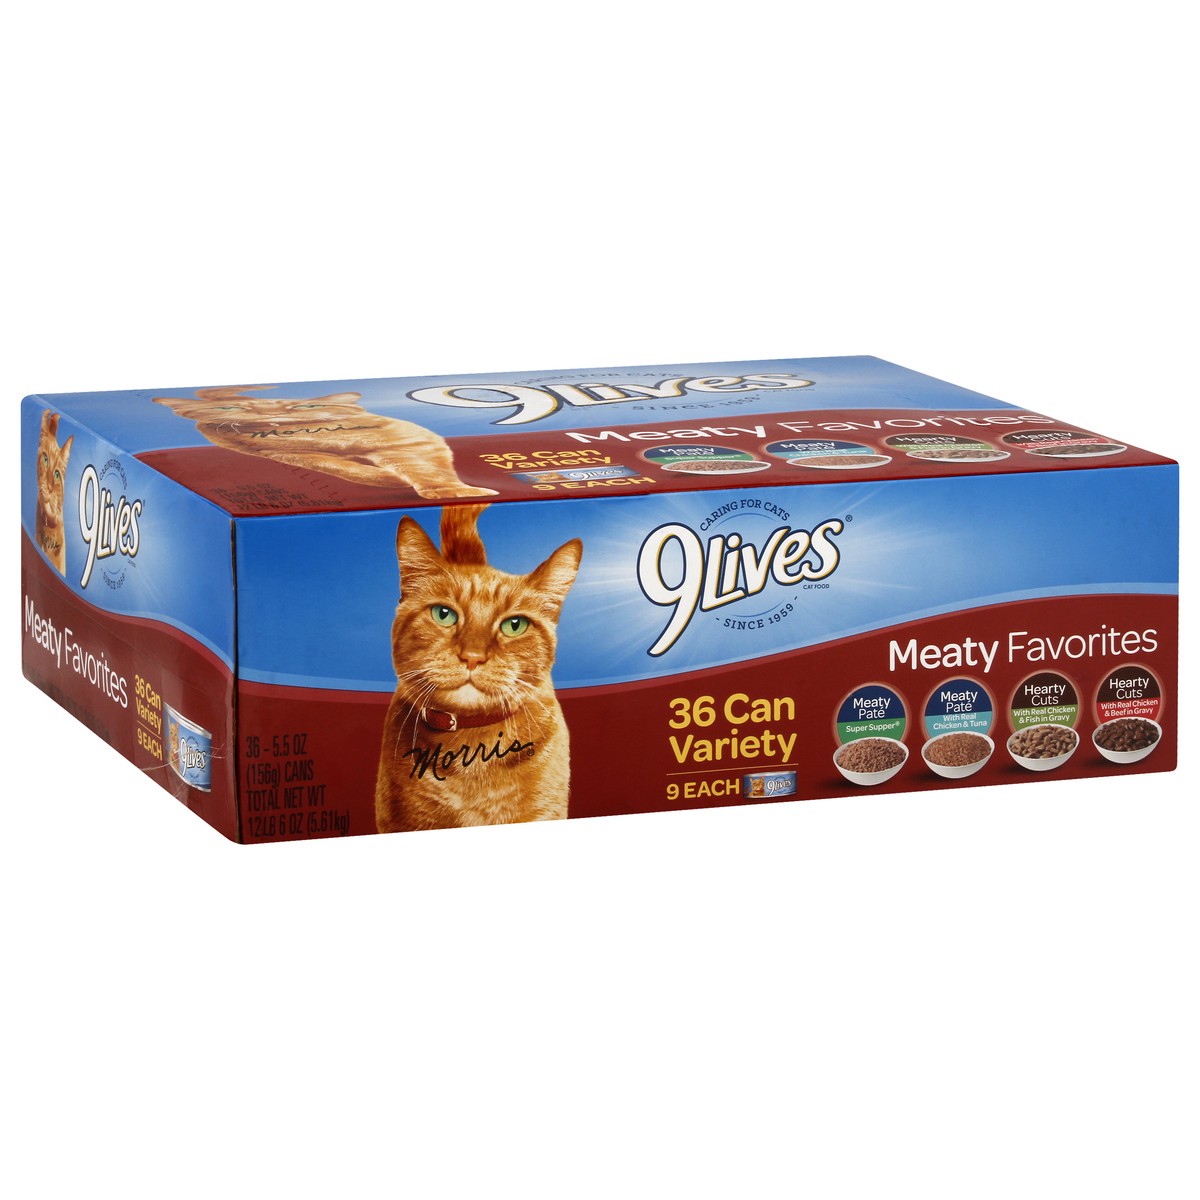 slide 7 of 9, 9Lives Meaty Favorites Variety Pack, 5.5-Ounce, 36-Pack, 5.5 oz